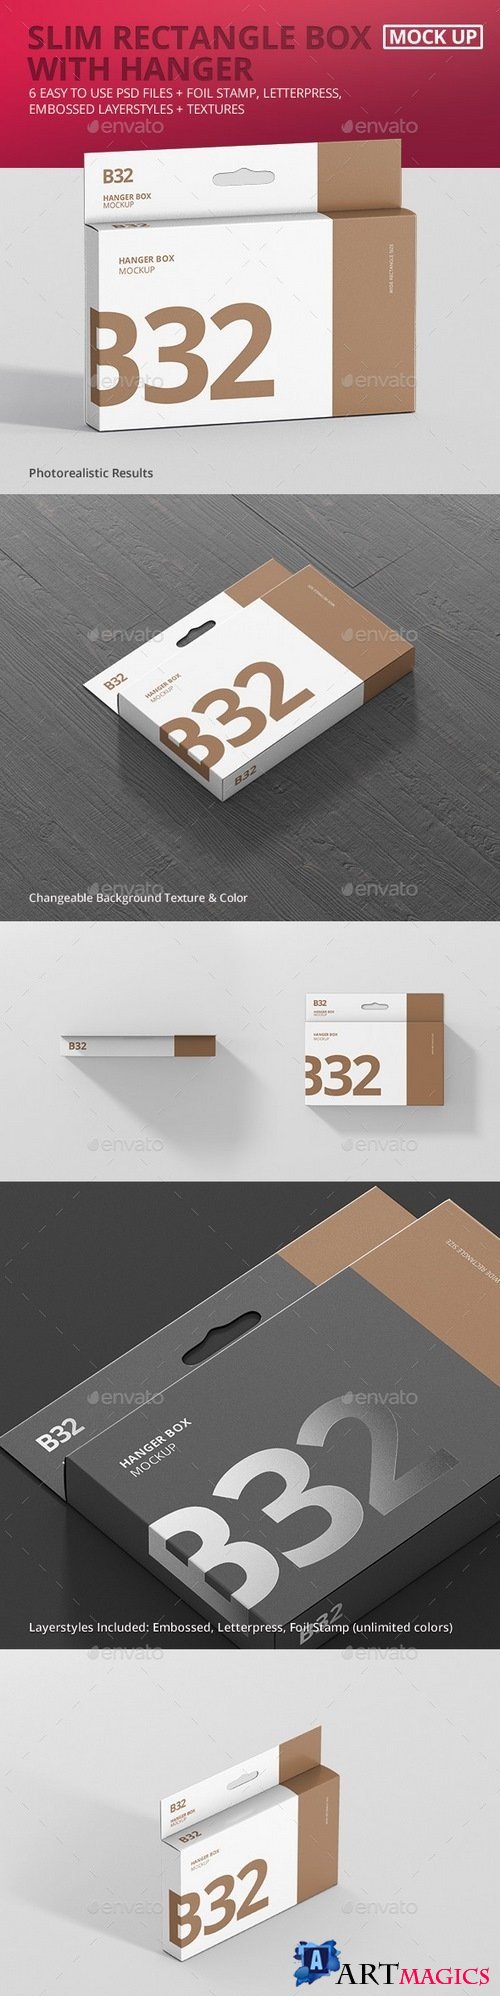 Box Mockup - Wide Slim Rectangle Size with Hanger - 21258176